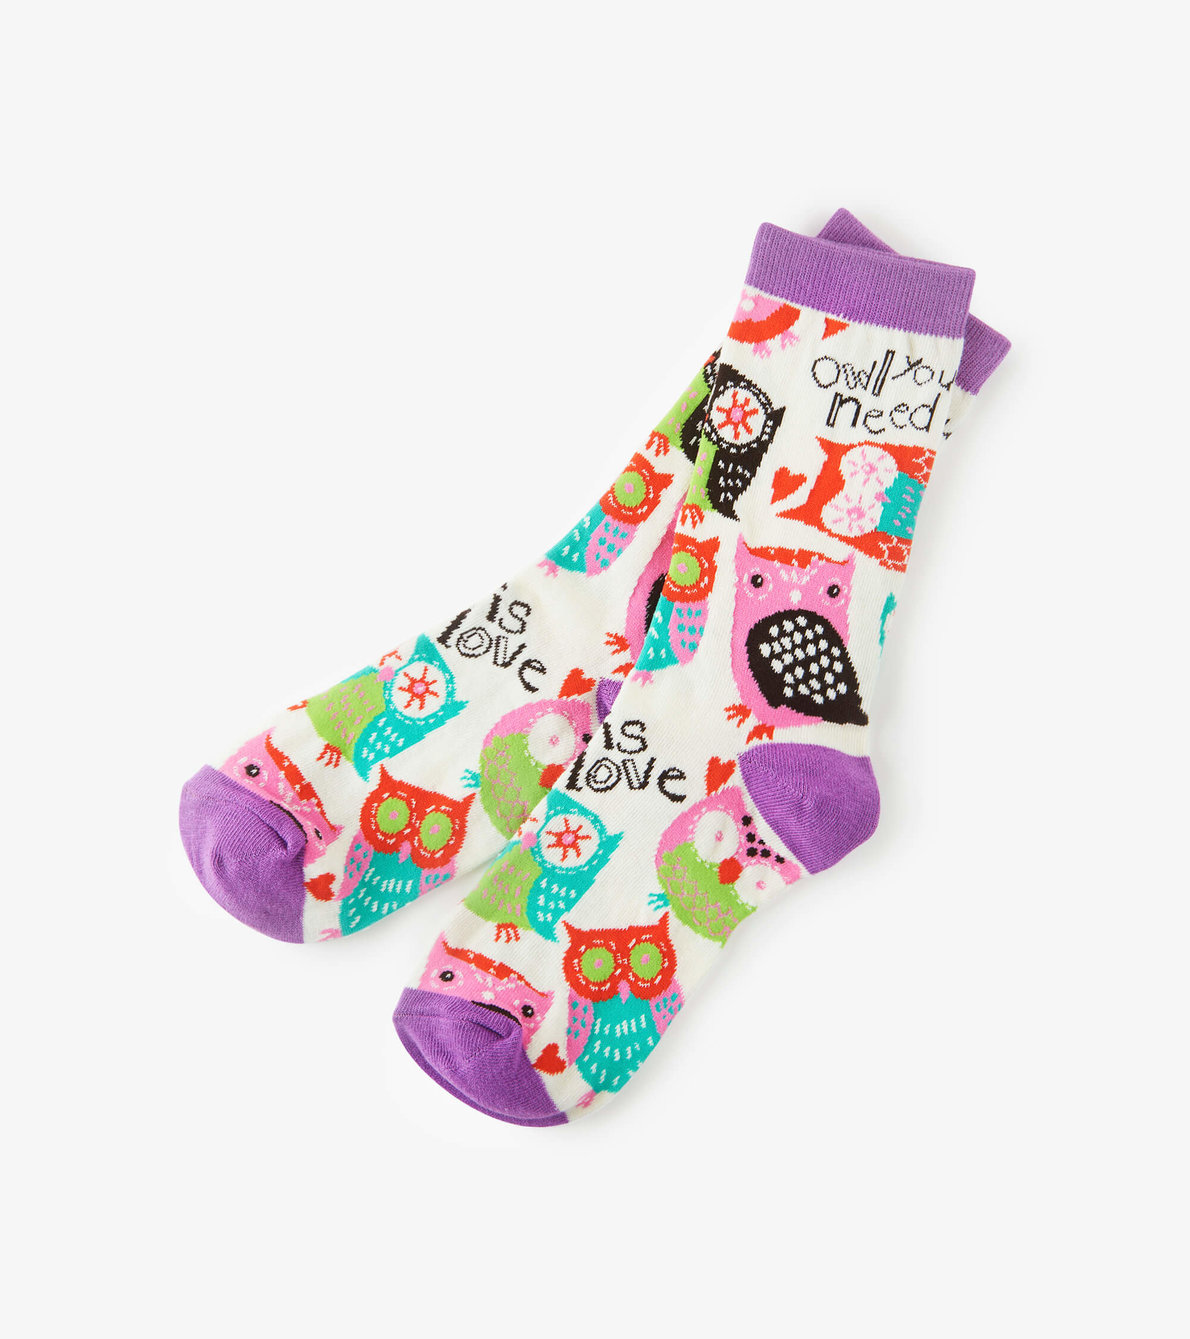 View larger image of Owl you need is Love Women's Crew Socks